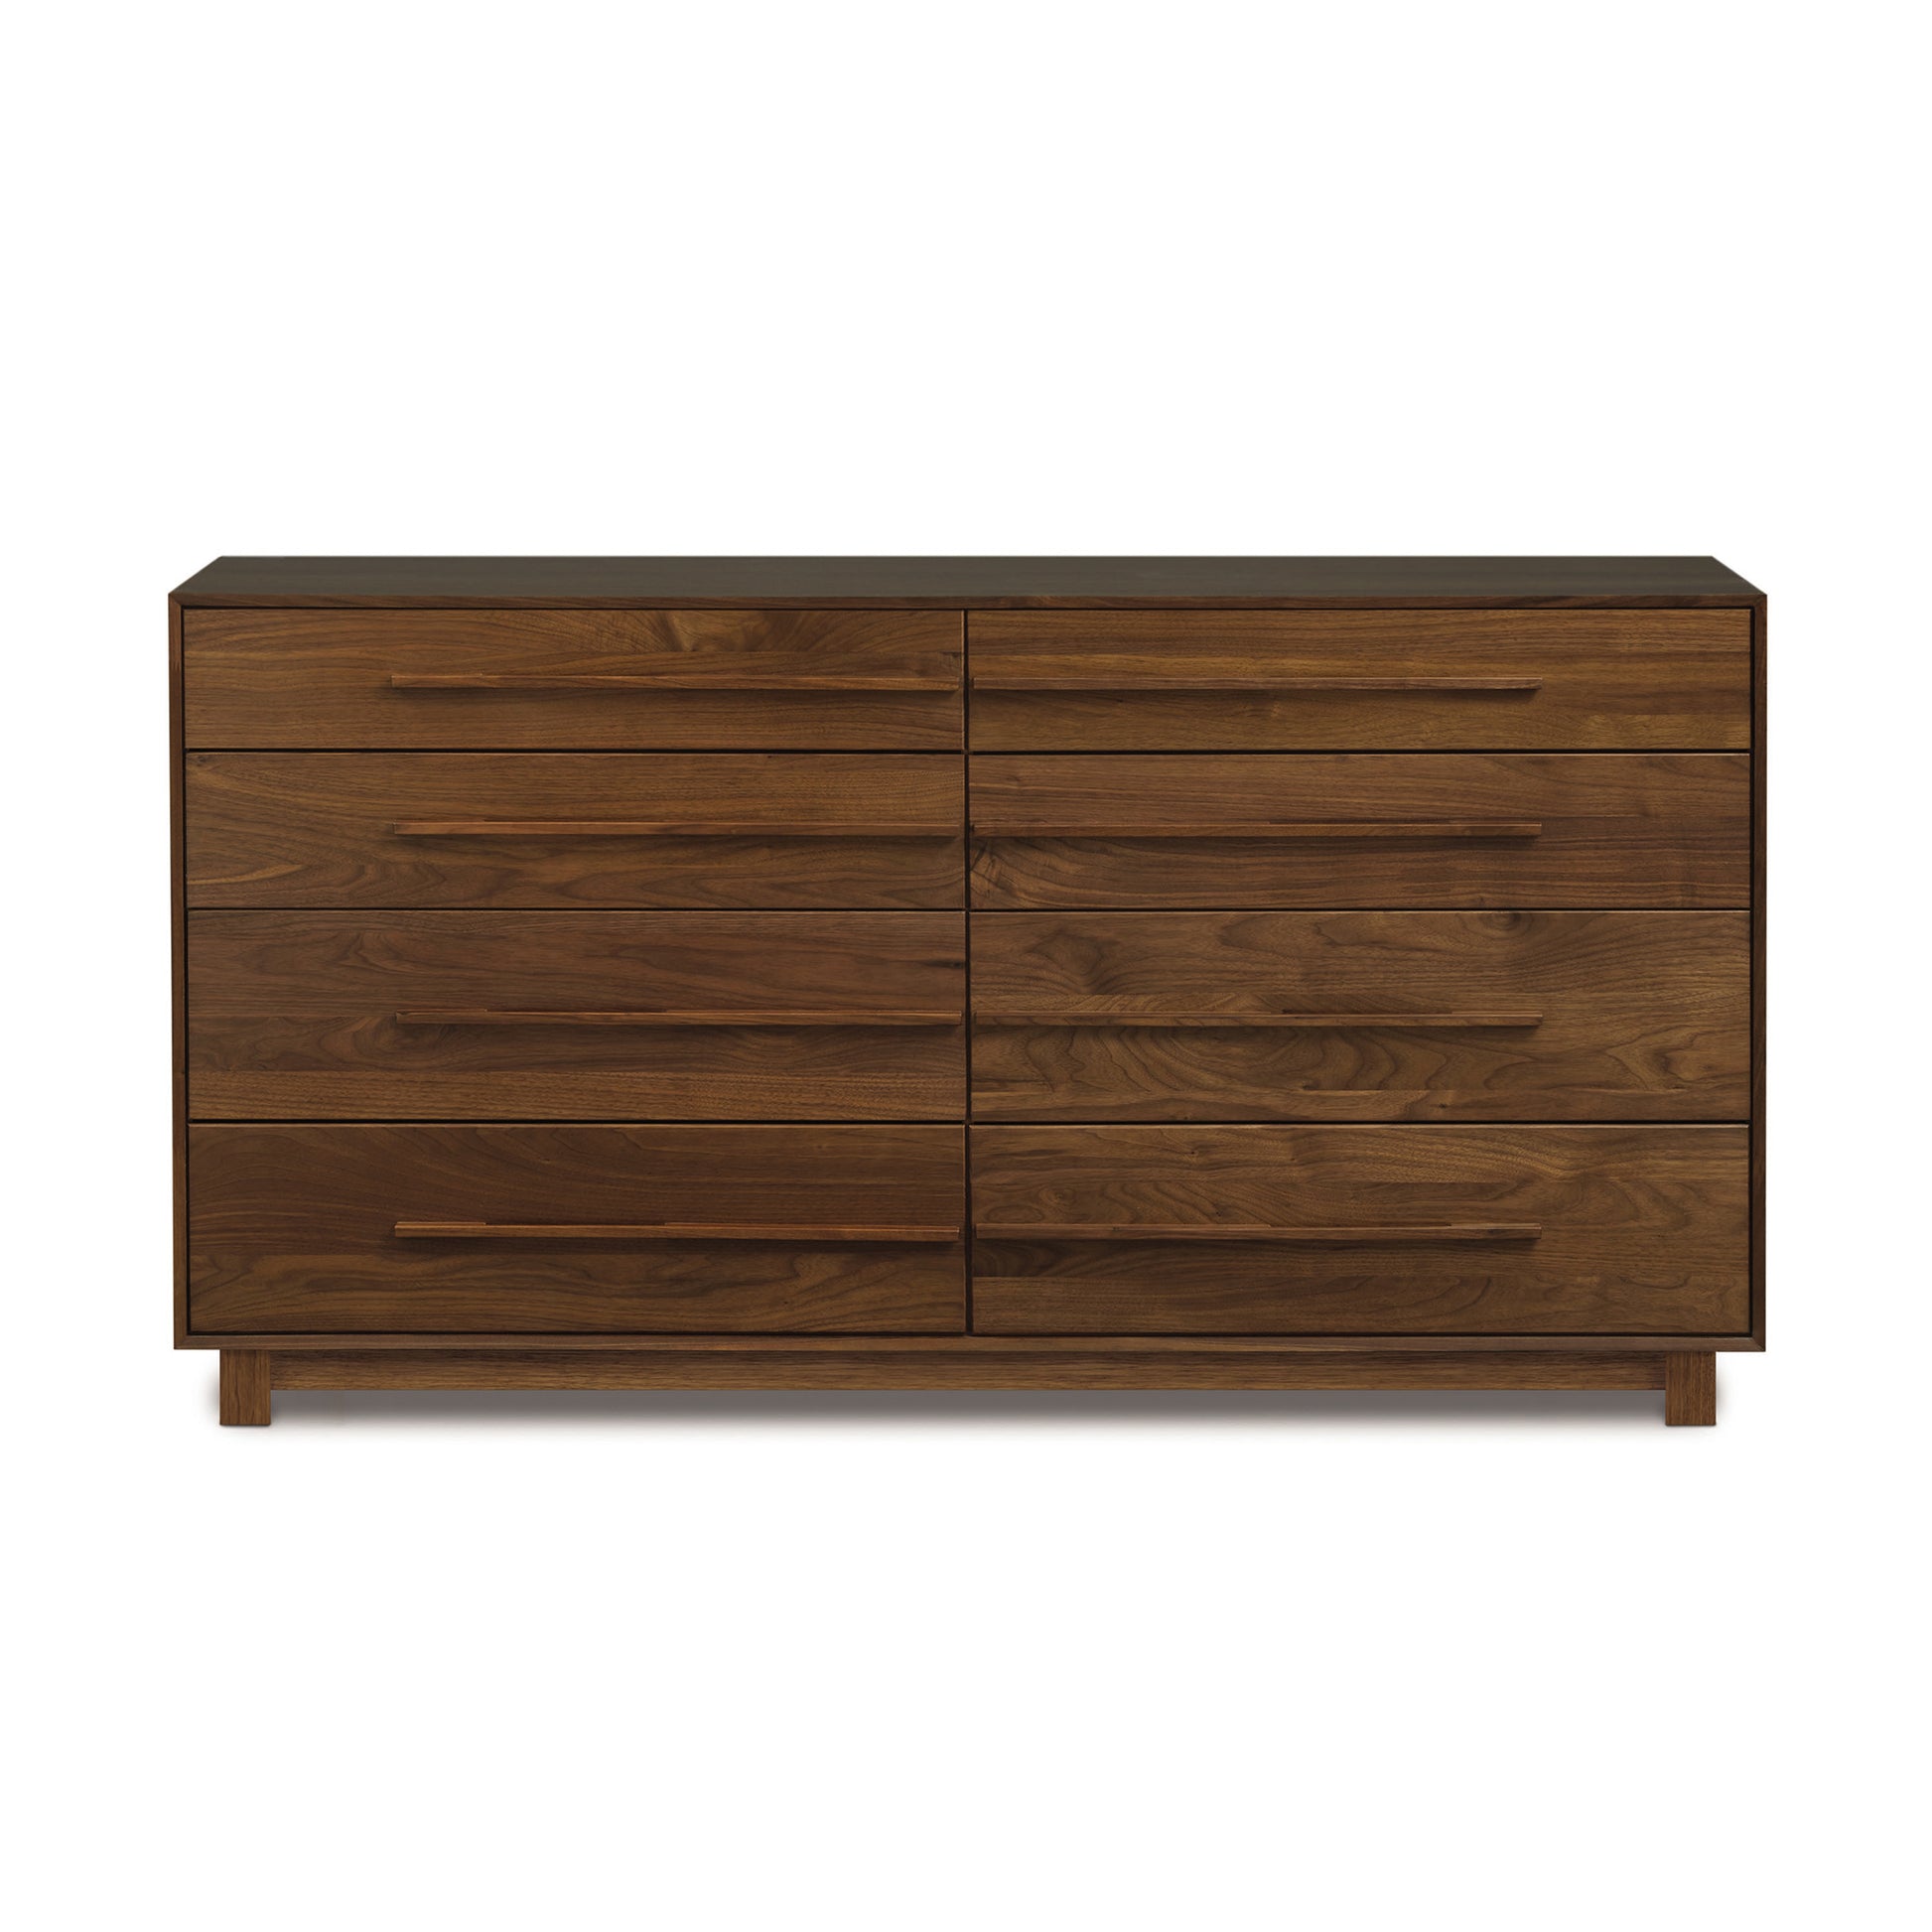 A Copeland Furniture Sloane 8-Drawer Dresser, perfect for a contemporary setting.